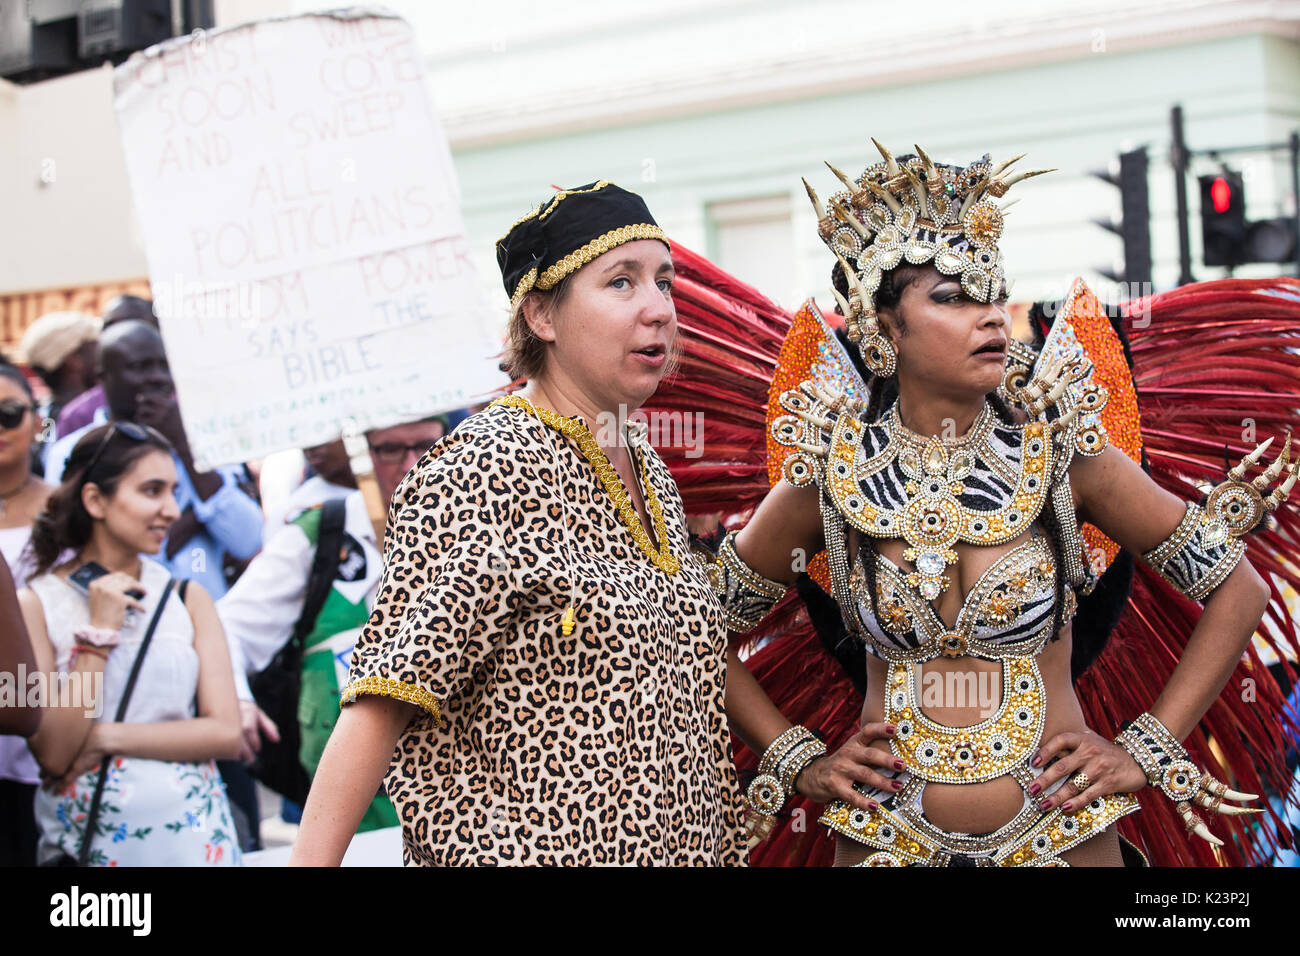 London, UK. 28th Aug, 2017. Political protest message taking a stand during the festival of Notting Hill Credit: Sara Lacuesta/Alamy Live News Stock Photo